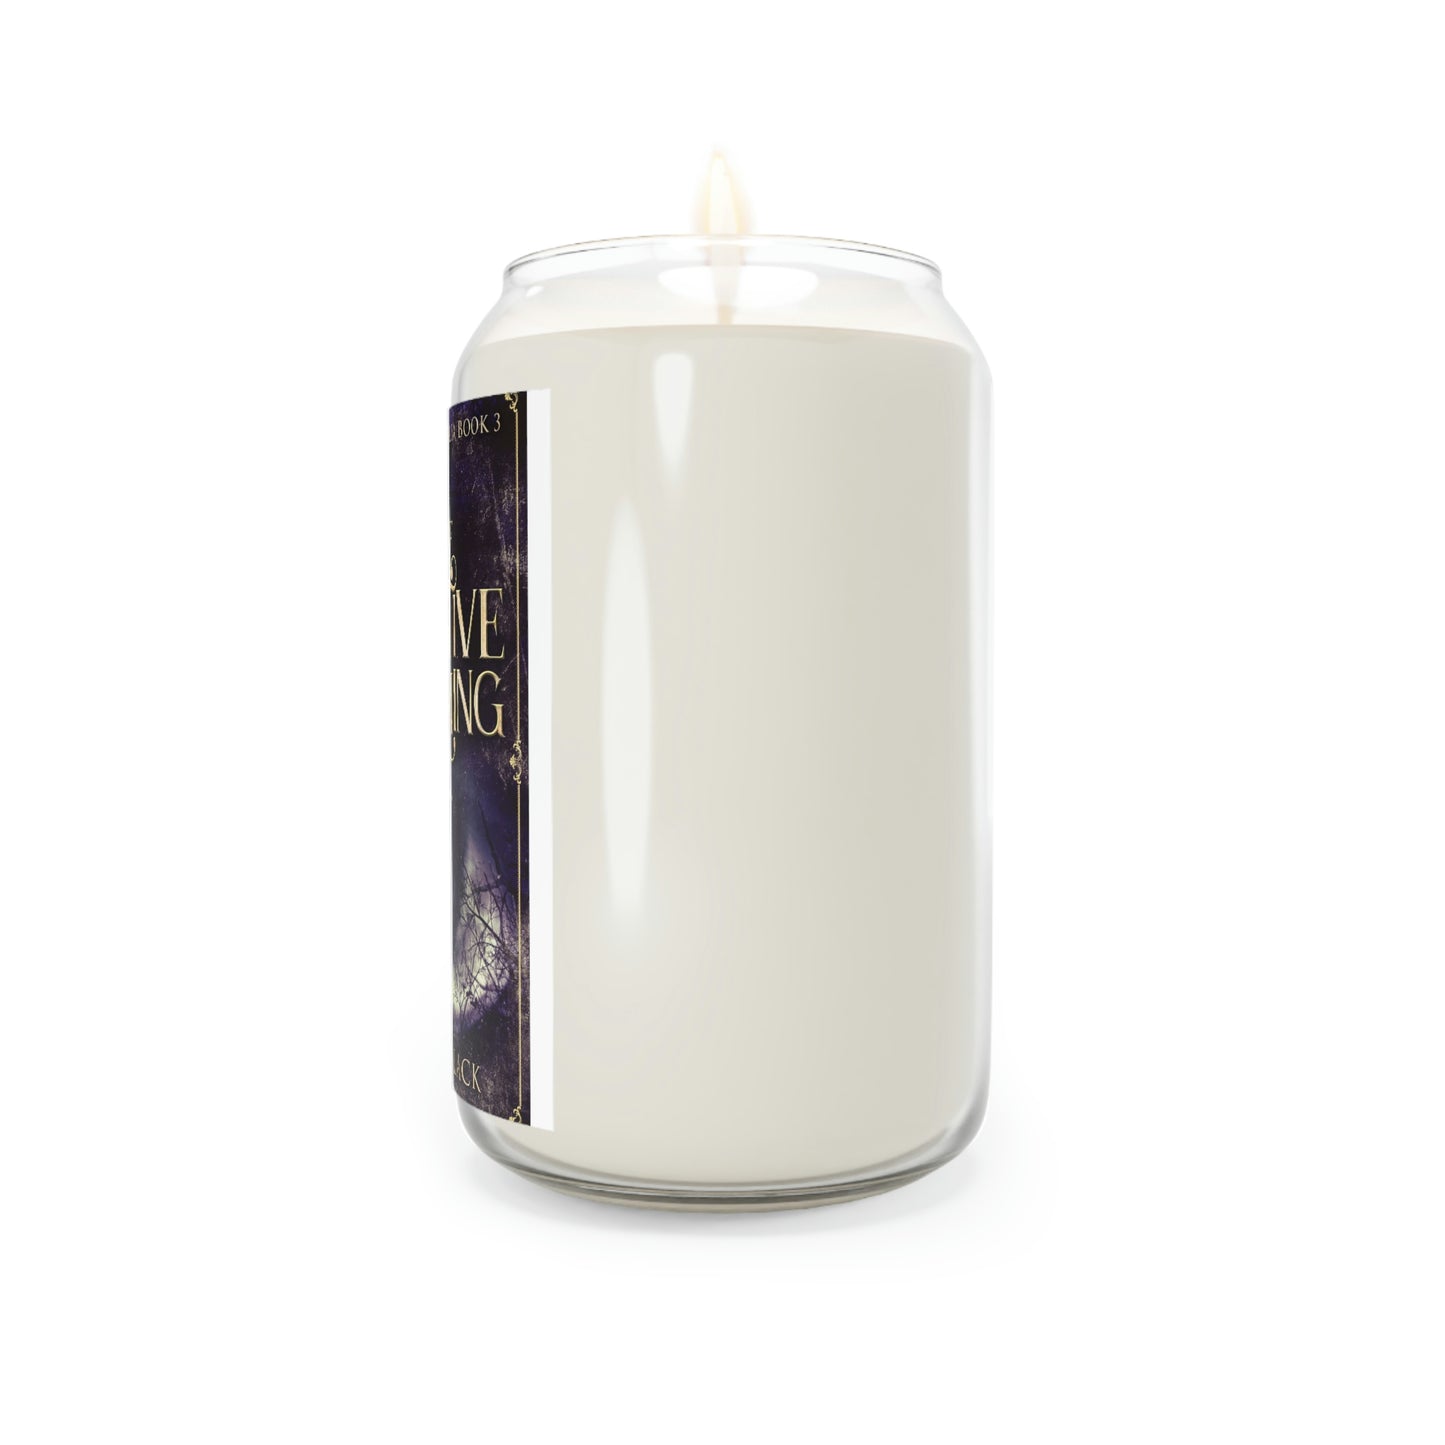 The Art of Effective Dreaming - Scented Candle